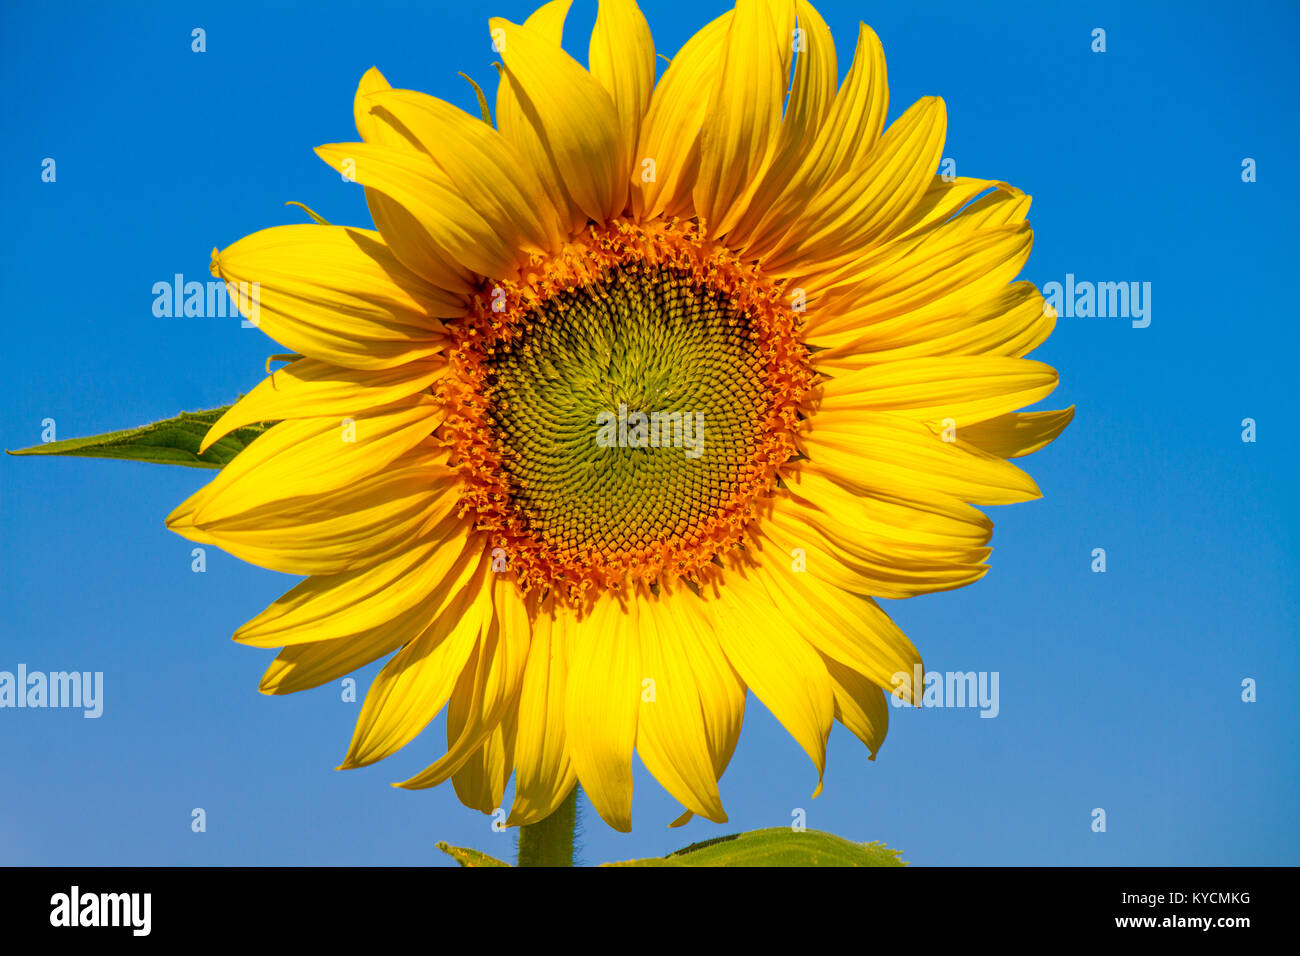 beautiful sunflower with blue sky background in sunny day, bright colorful yellow flower Stock Photo